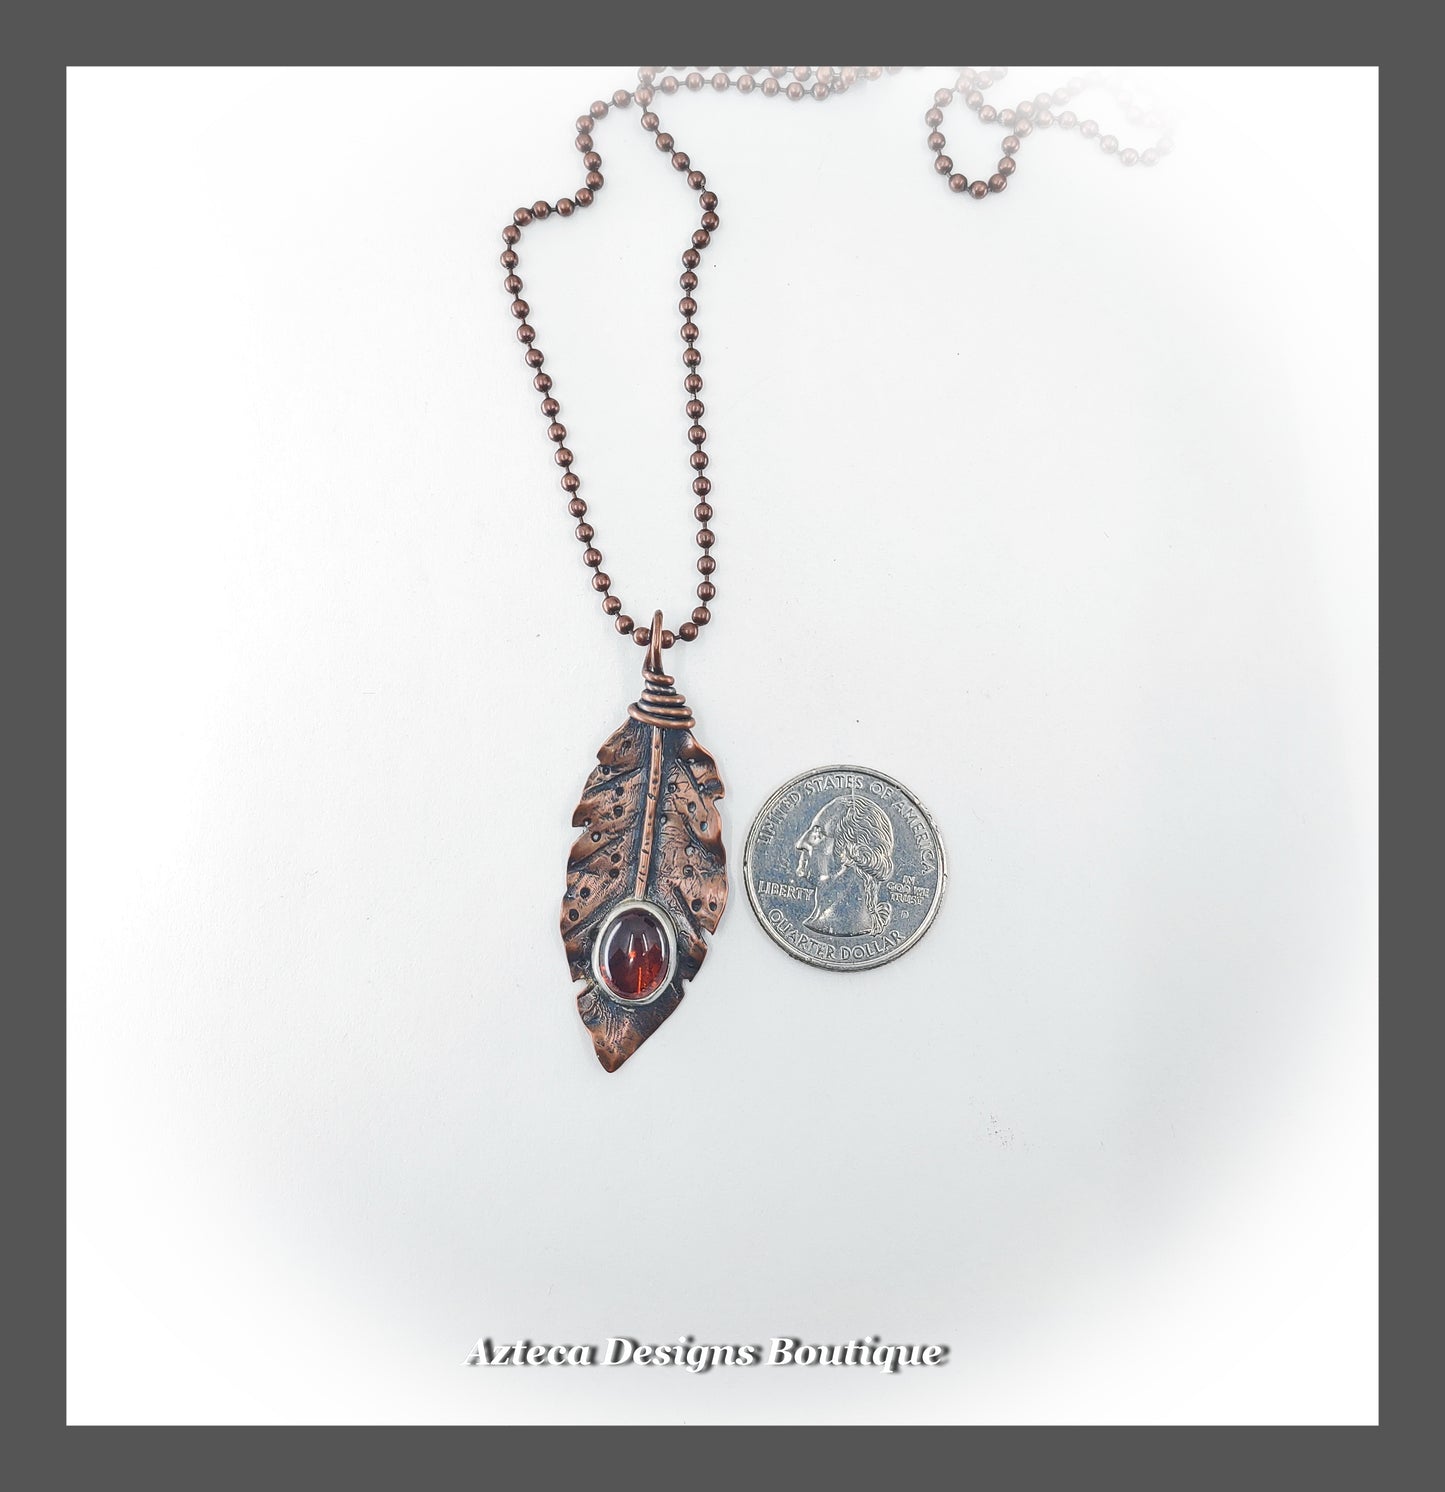 Fossilized Tree Resin + Hand Fabricated Rustic Copper Feather Necklace